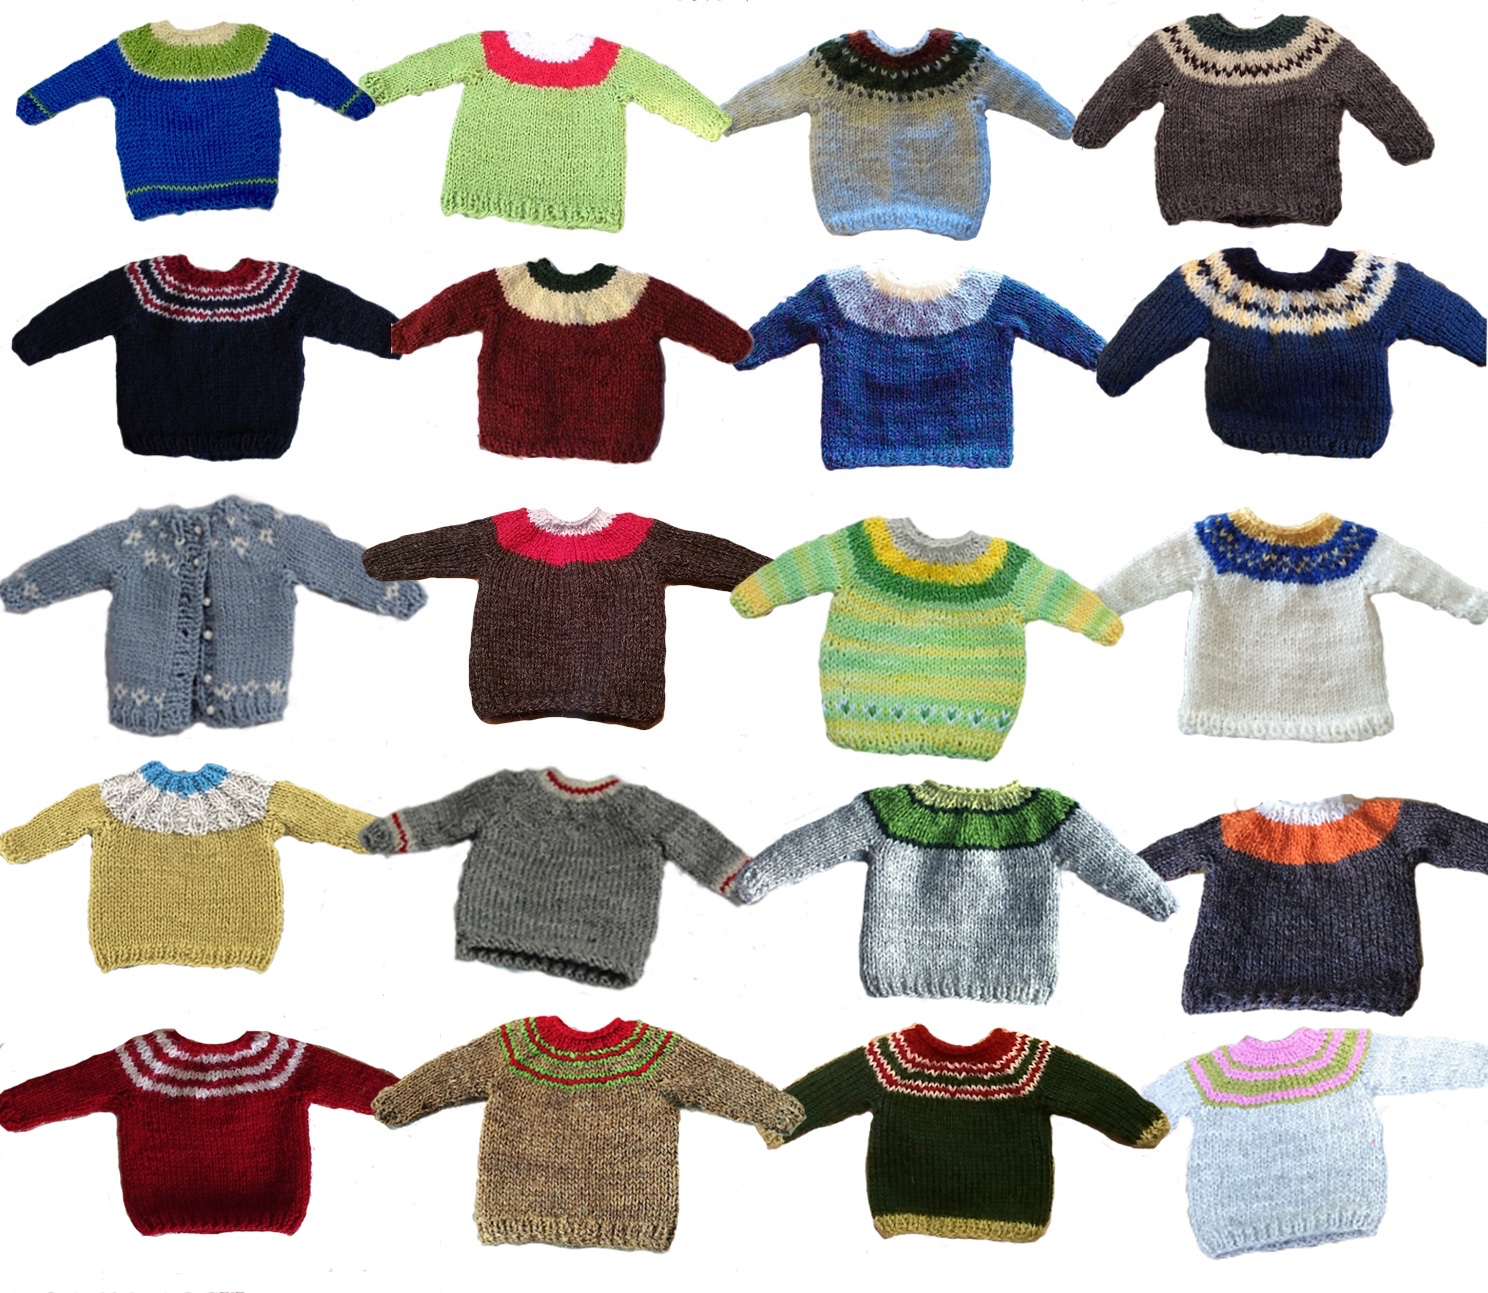 Just Crafty Enough – Cutest little wee sweaters